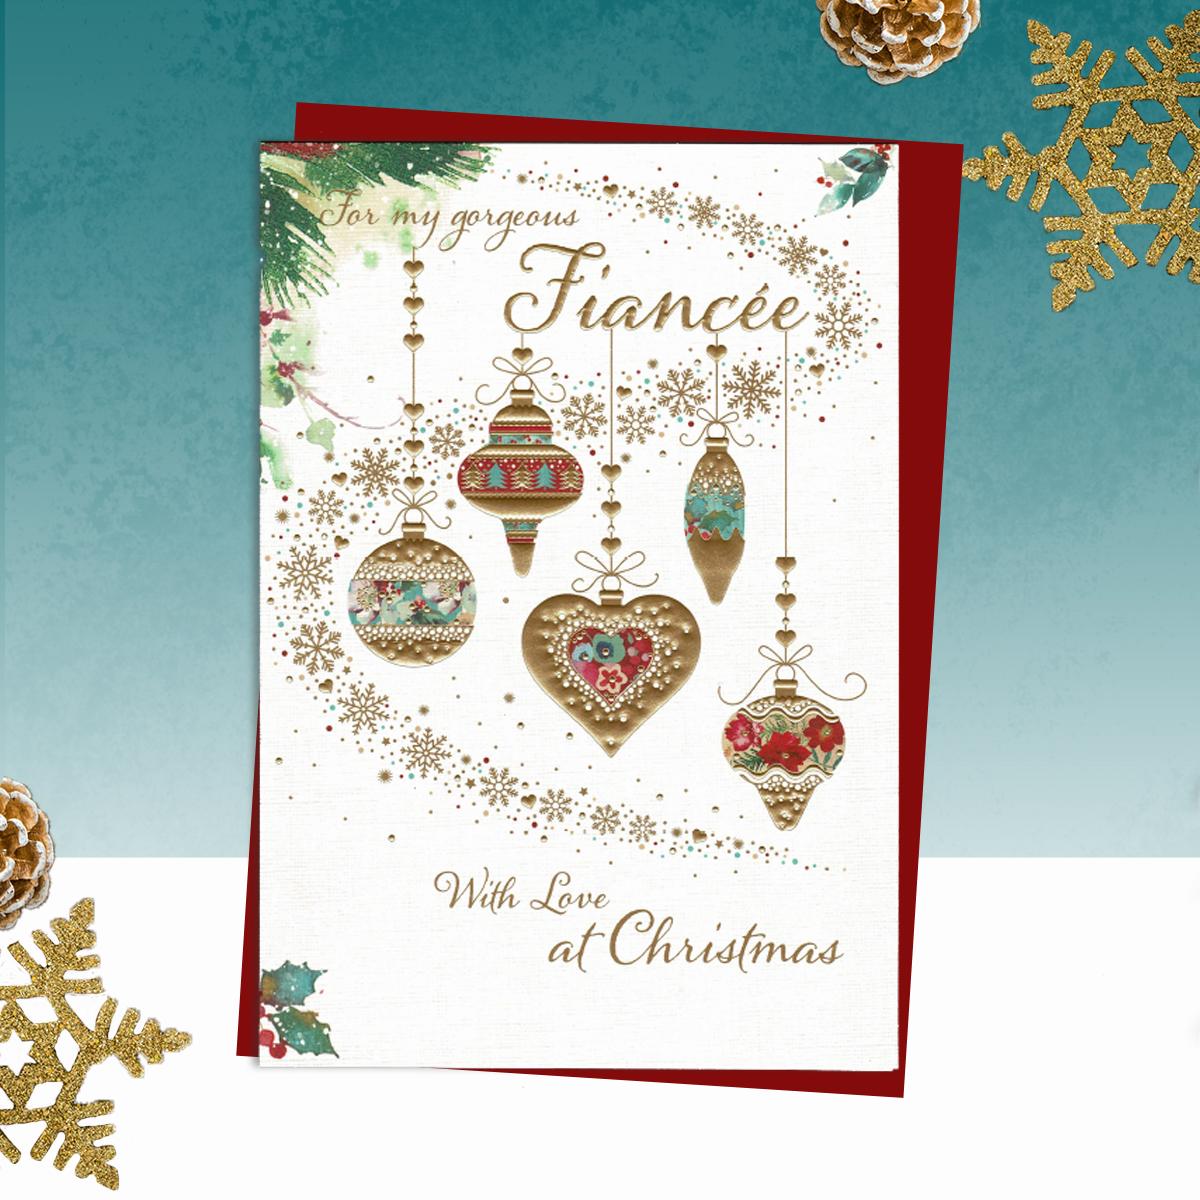 Gorgeous Fiancée Christmas Baubles Greeting Card Alongside Its Red Envelope